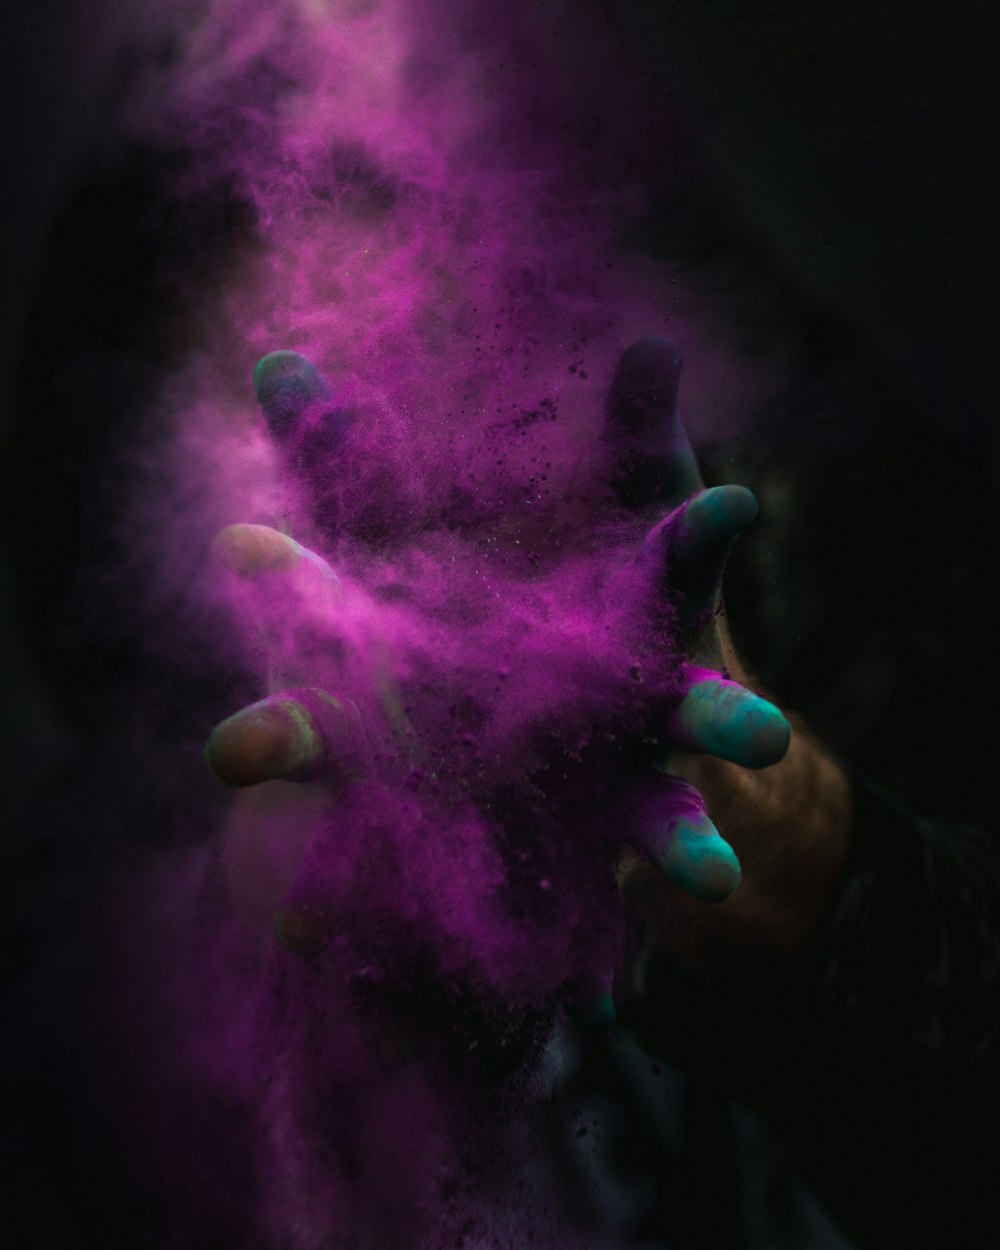 time-lapse photography of person spreading purple powder